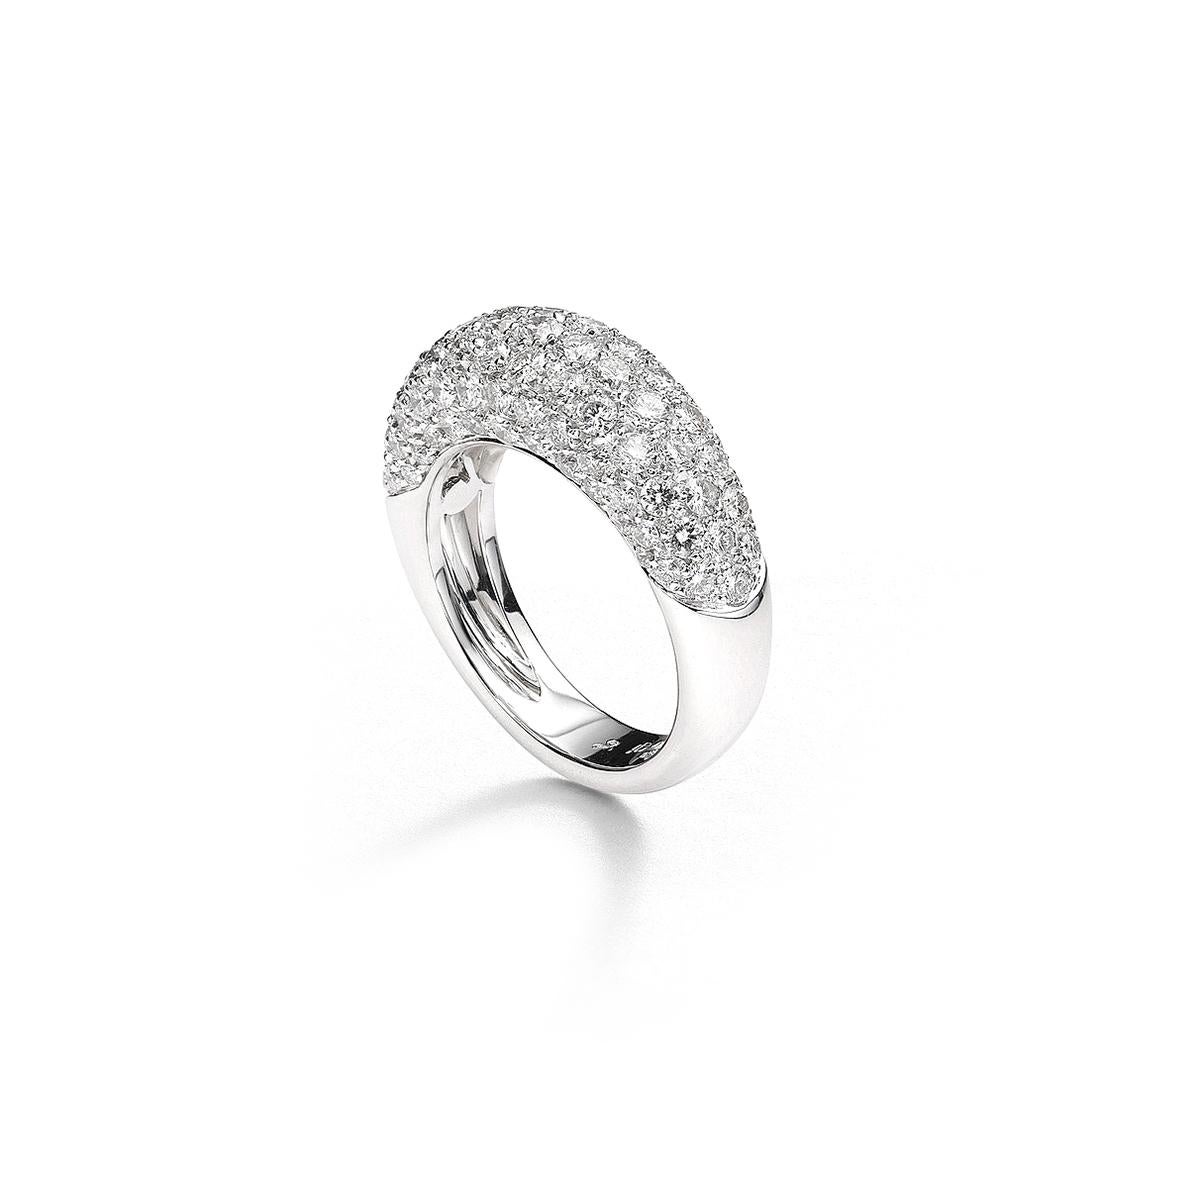 Ring white gold 18K set with diamonds 2.61 cts.